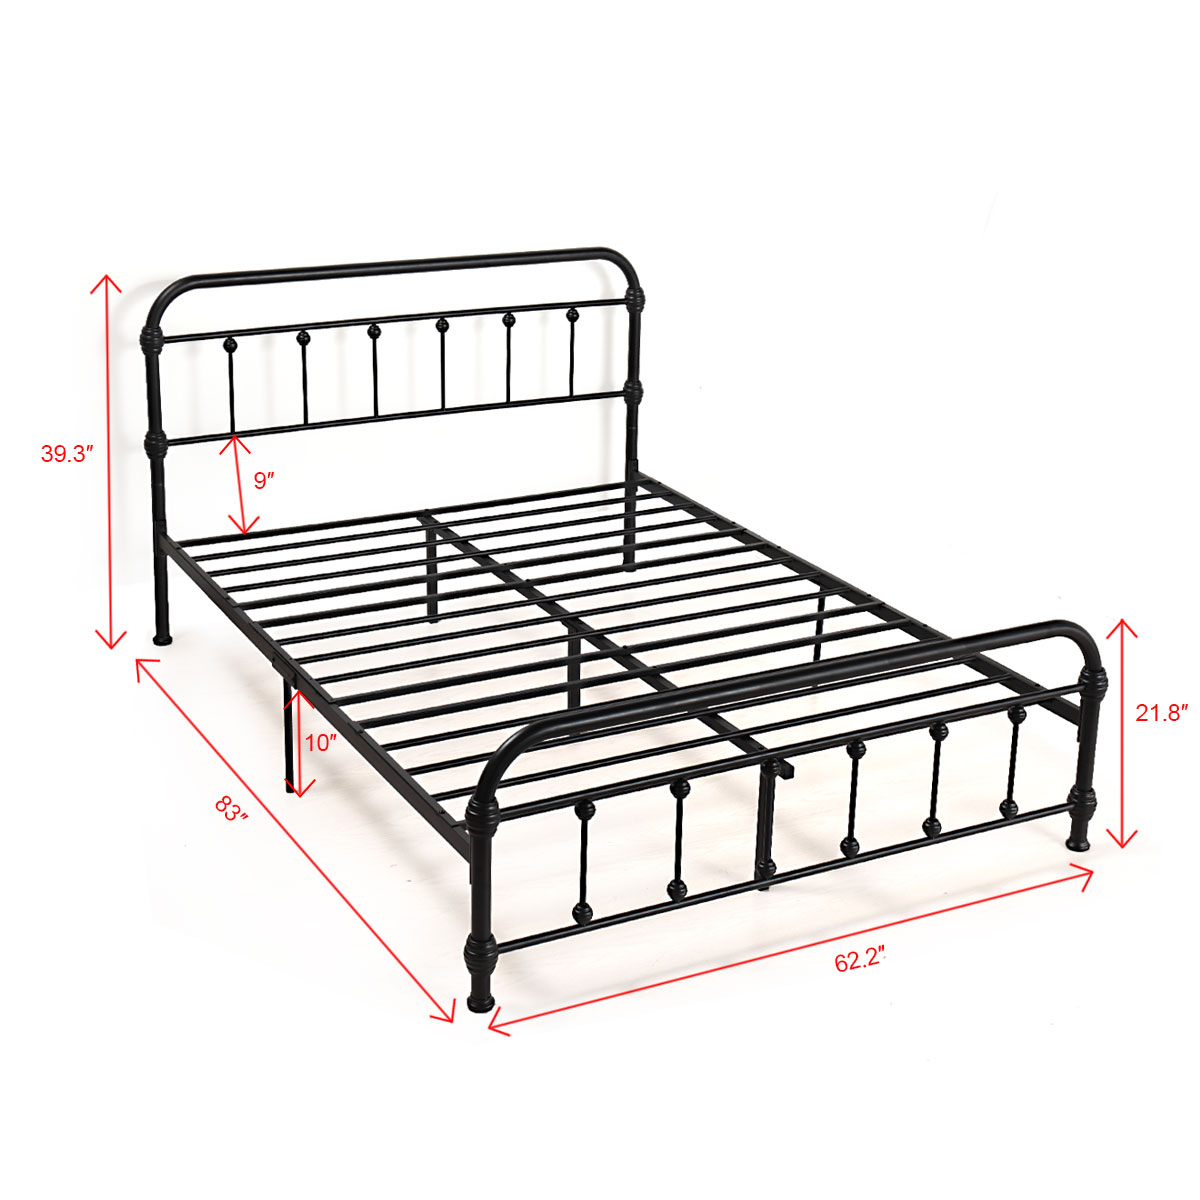 Jaxpety Queen Size Bed Frame Heavy Duty, Metal Bed Frame With Headboard